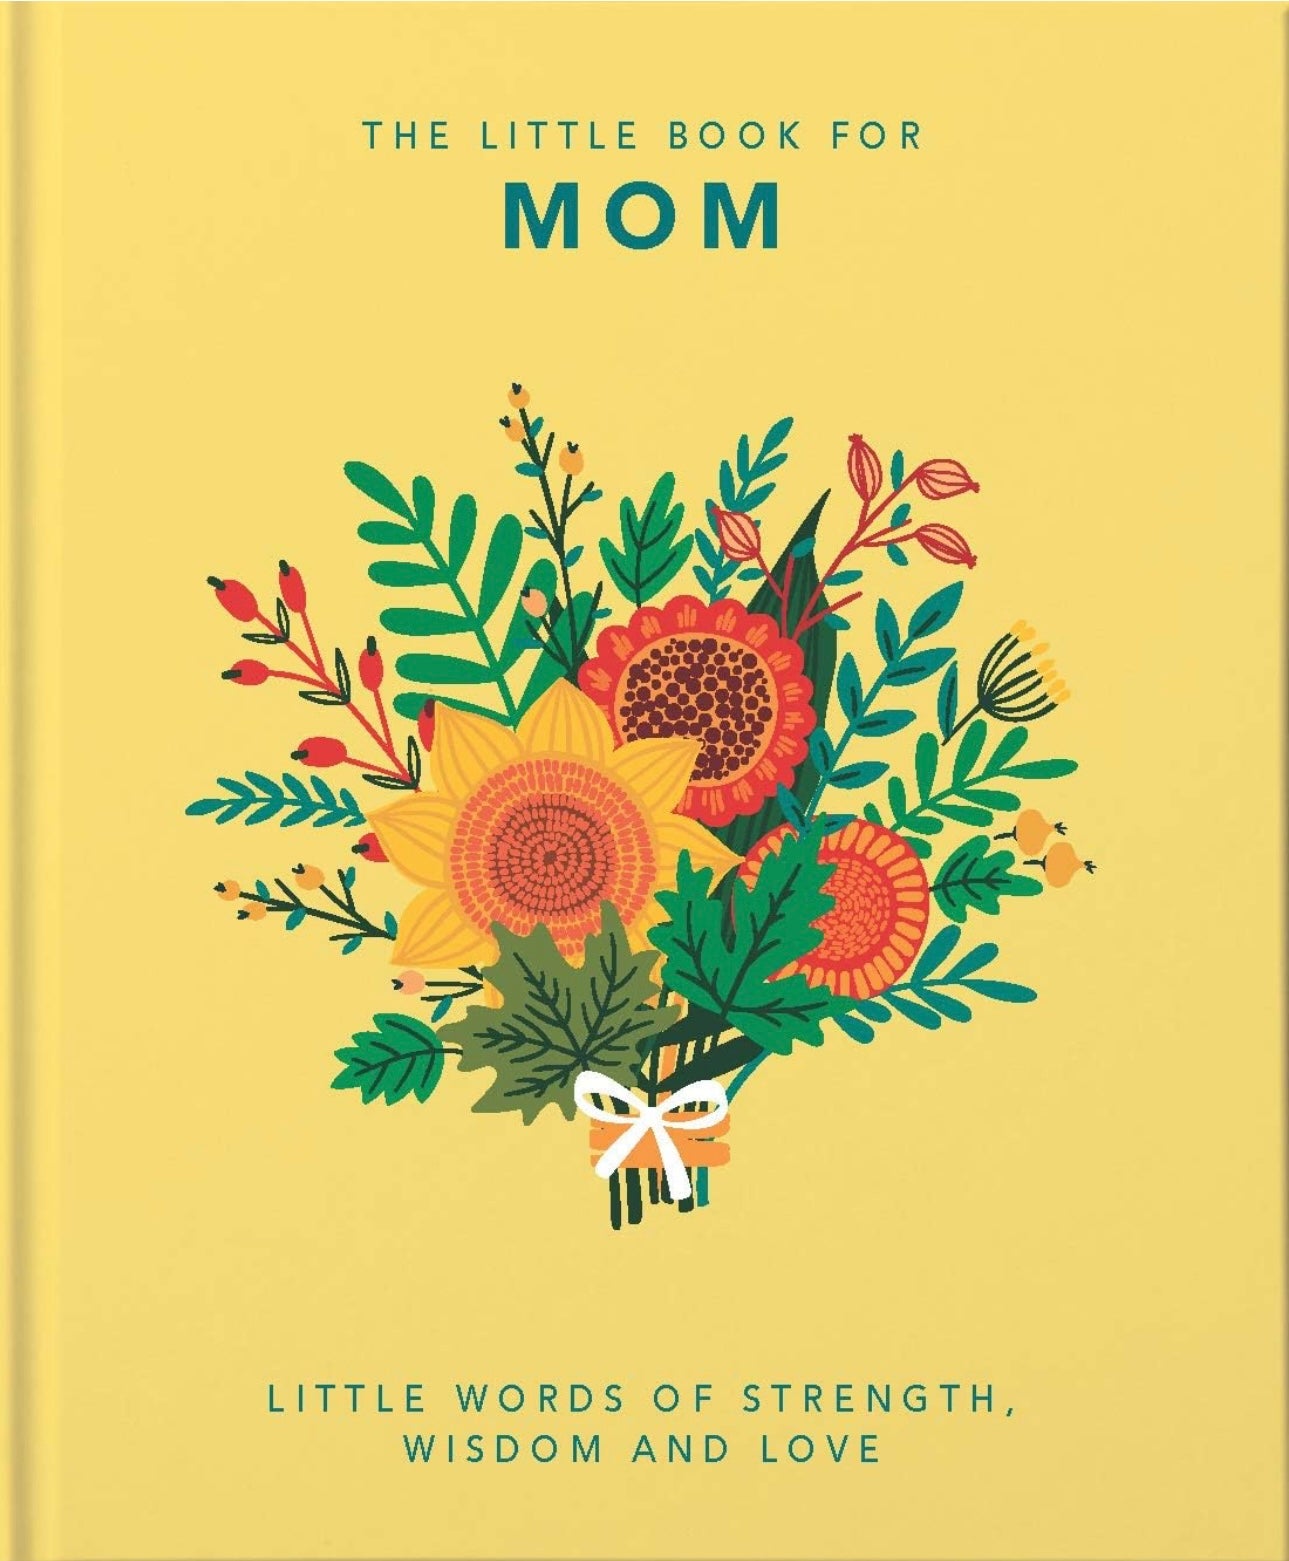 The Little Book of Mom: Little Words of Strength, Wisdom, and Love hardcover